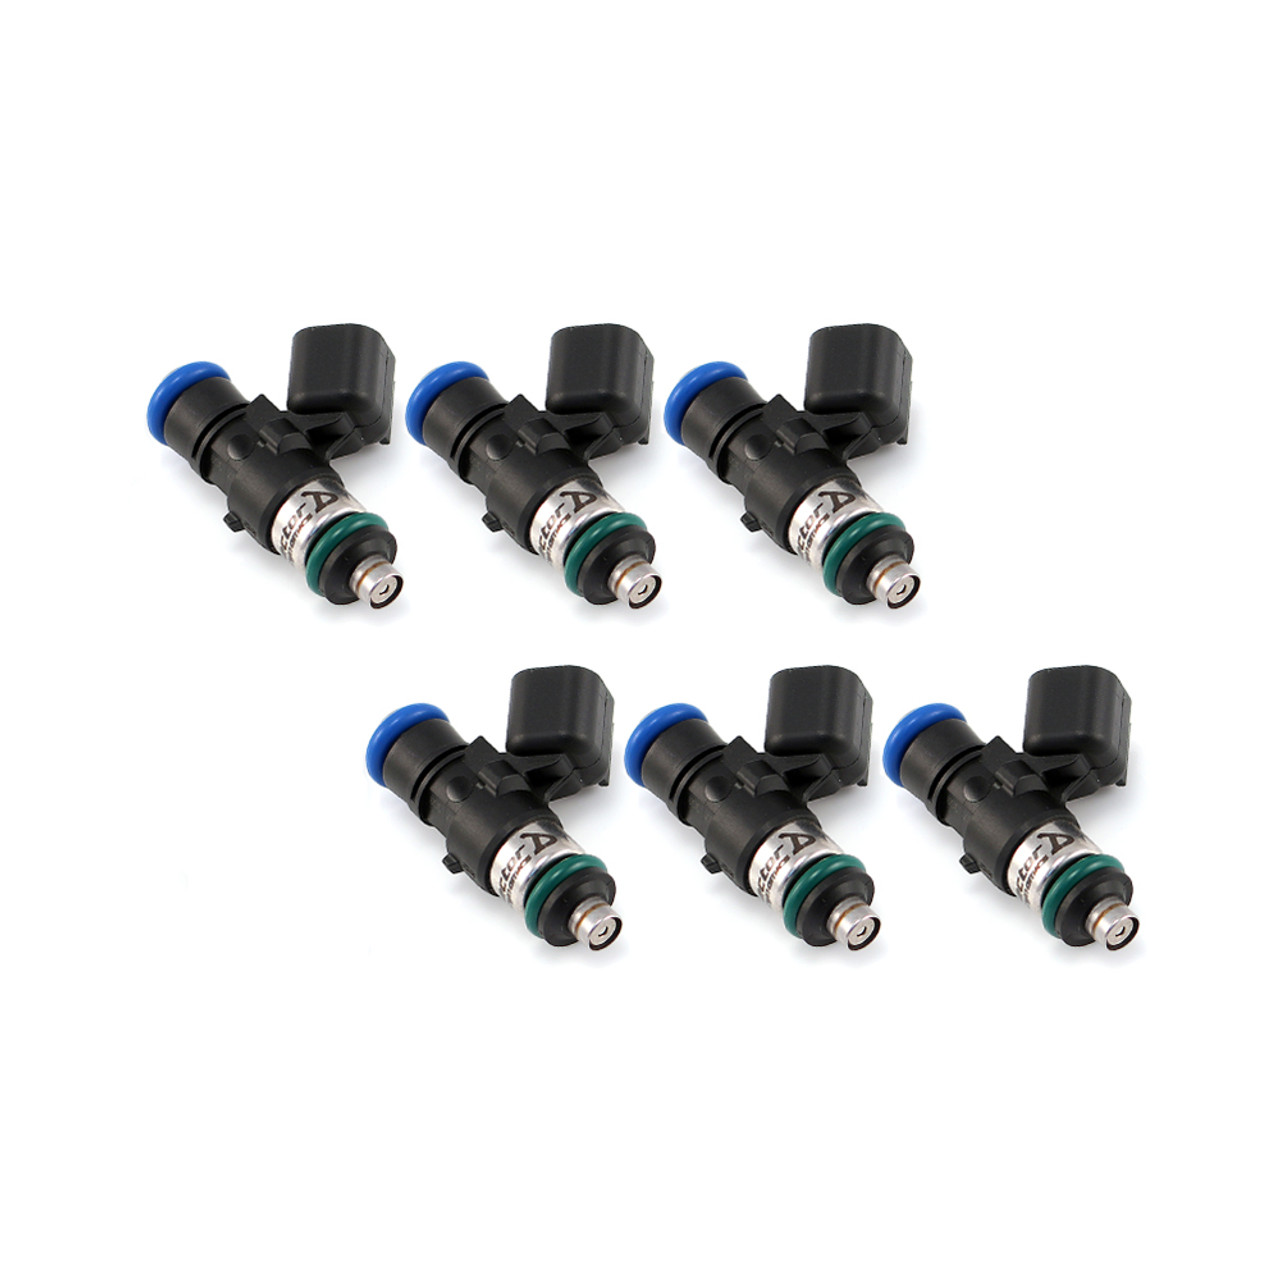 ID1300-XDS 1300.34.14.14.6 Fuel Injectors, direct fitment, set of 6